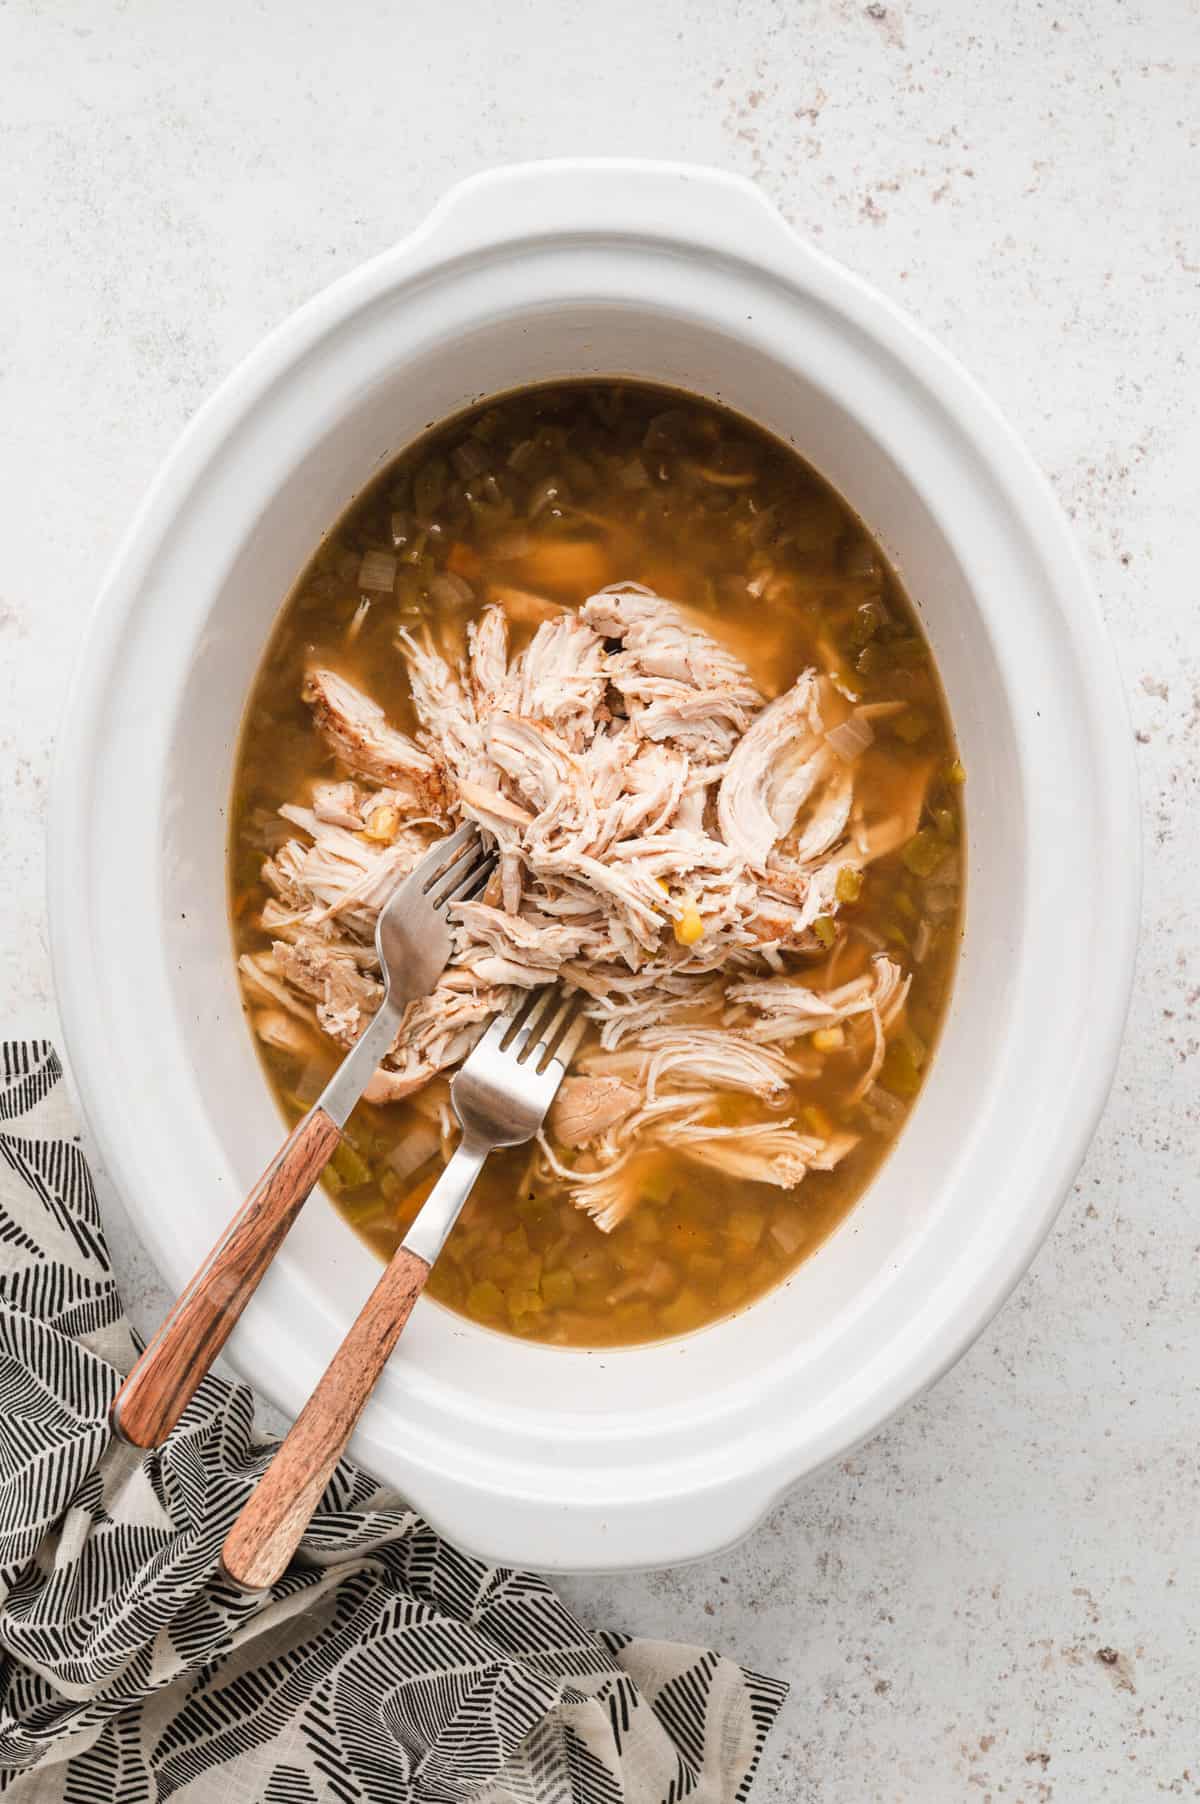 Removing chicken breasts from crock pot and shredding with two forks for Crock Pot White Chicken Chili recipe